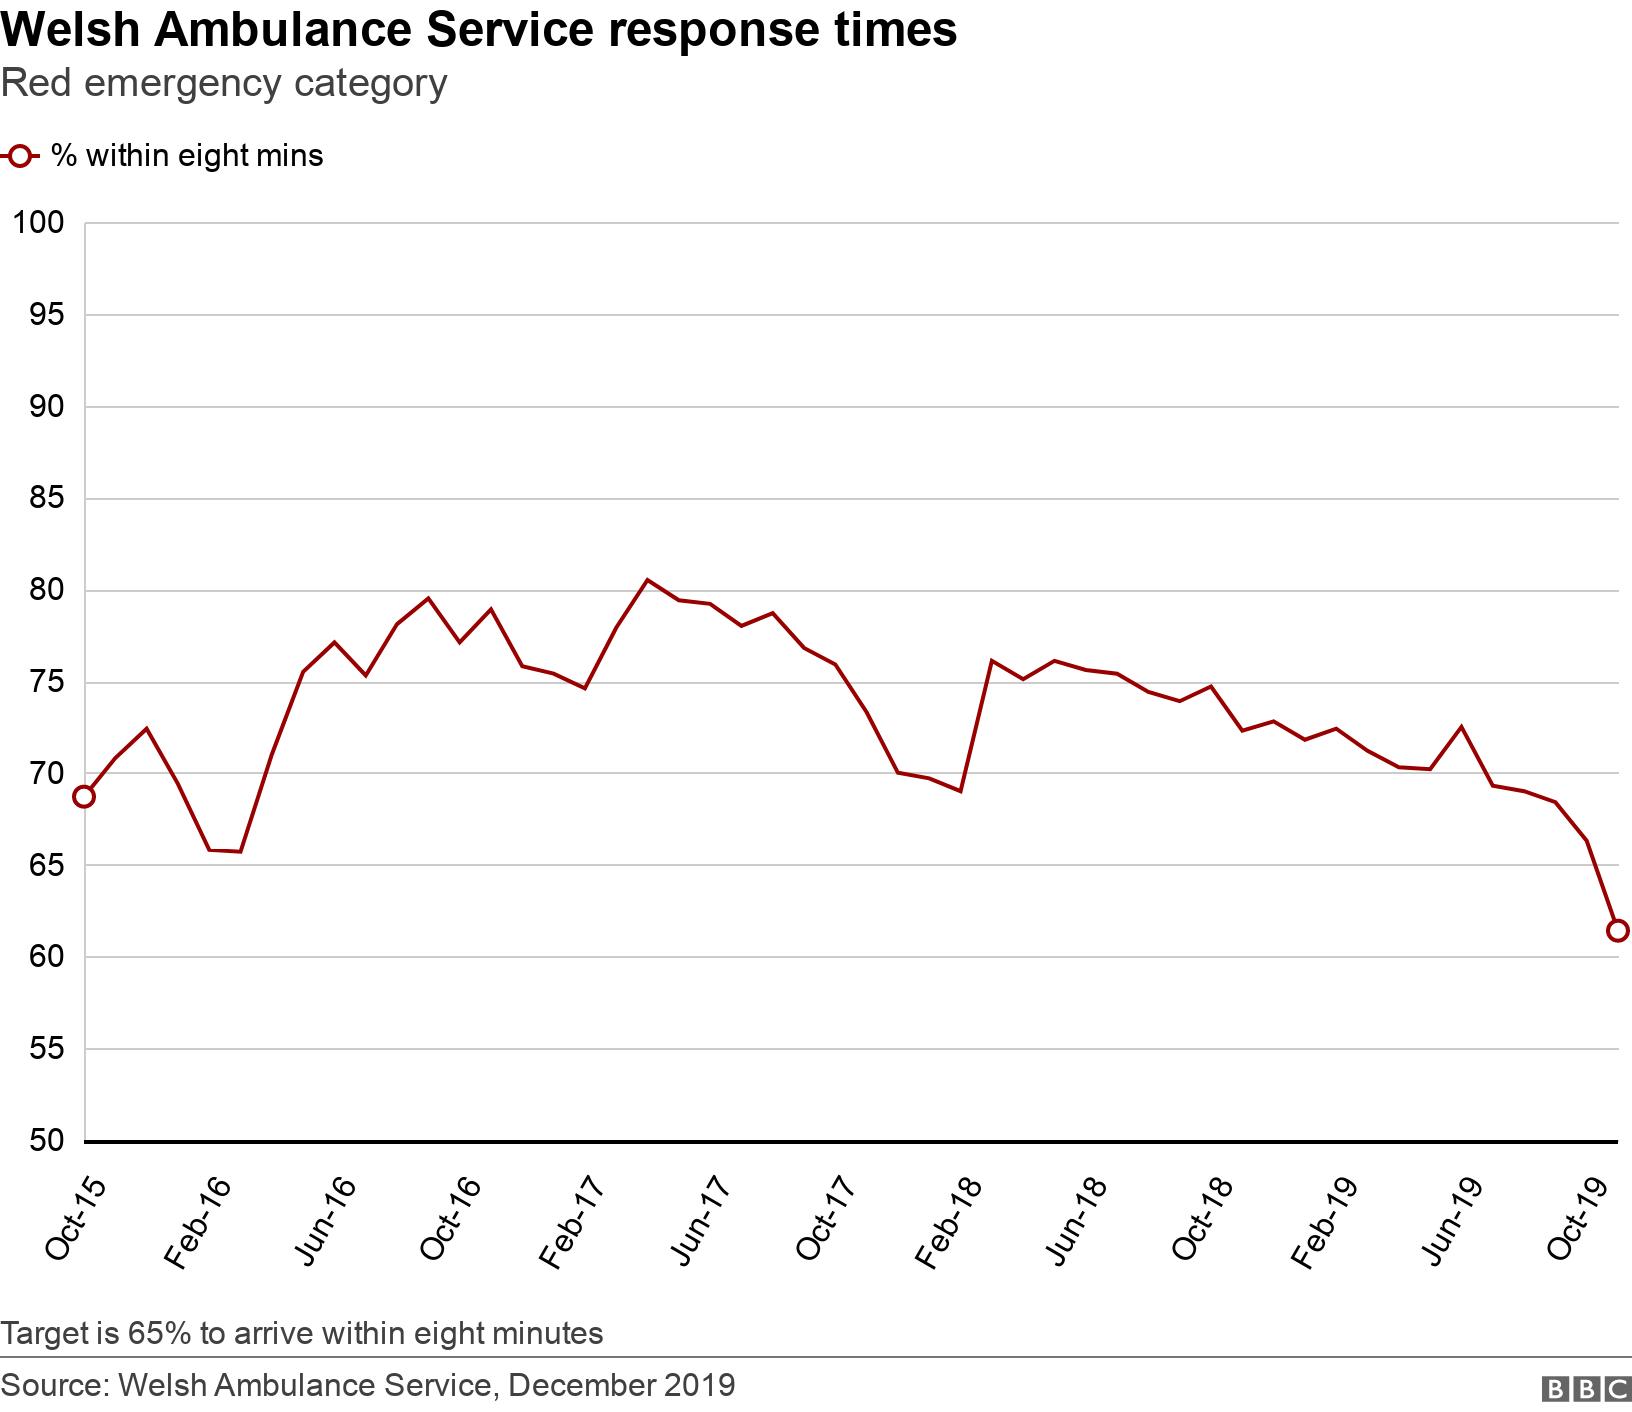 Welsh Ambulance Service response times. Red emergency category. Target is 65% to arrive within eight minutes.